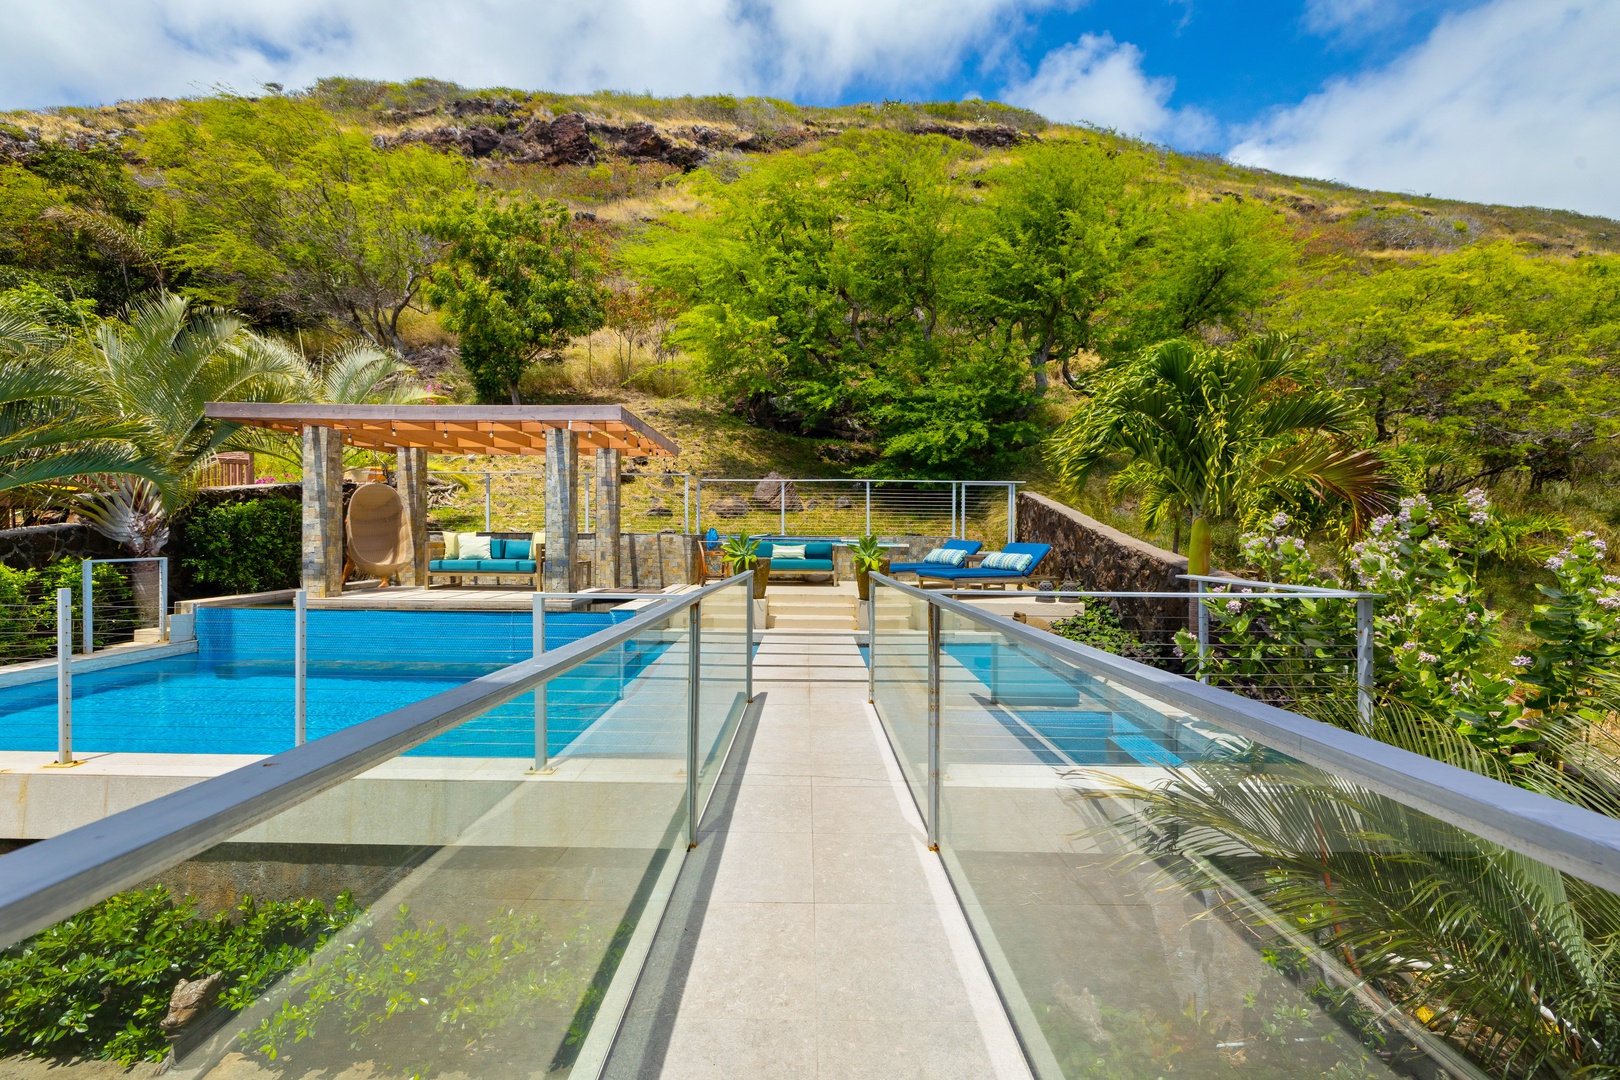 Honolulu Vacation Rentals, Villa Luana - Private hotel-style pool area, with lounge seating!